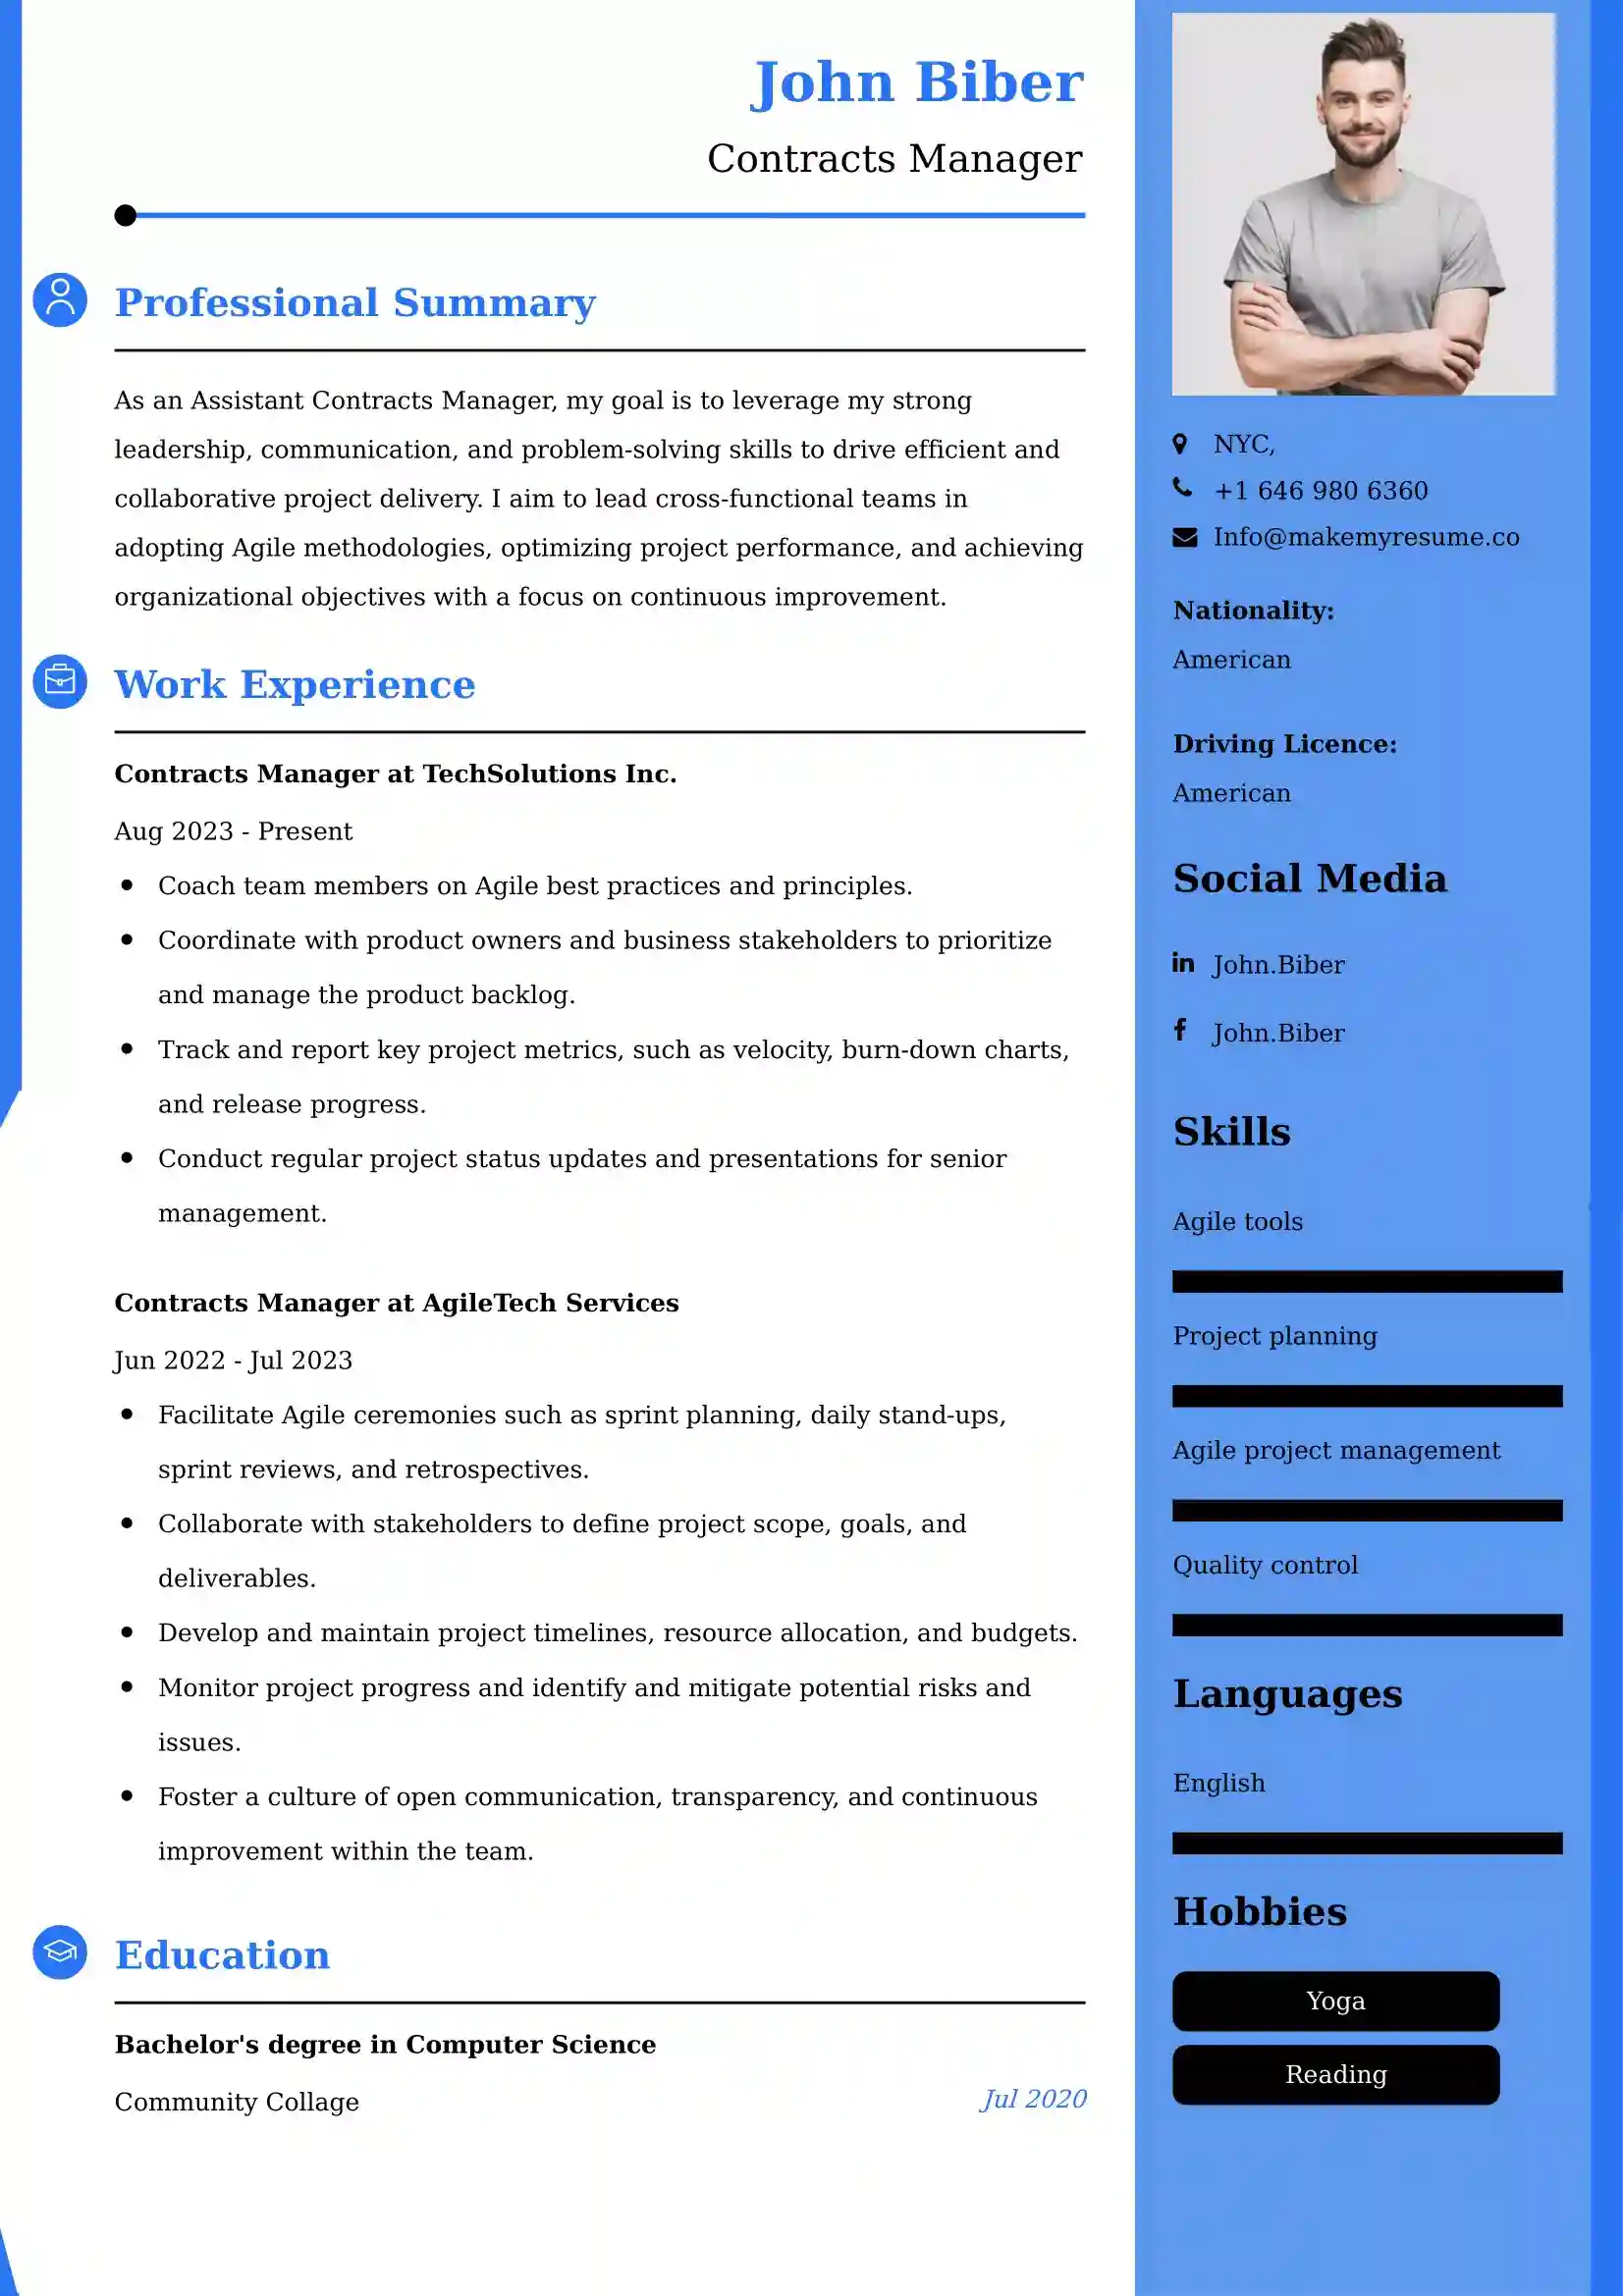 Information Technology CV Examples with 65+ ATS-Compatible Templates